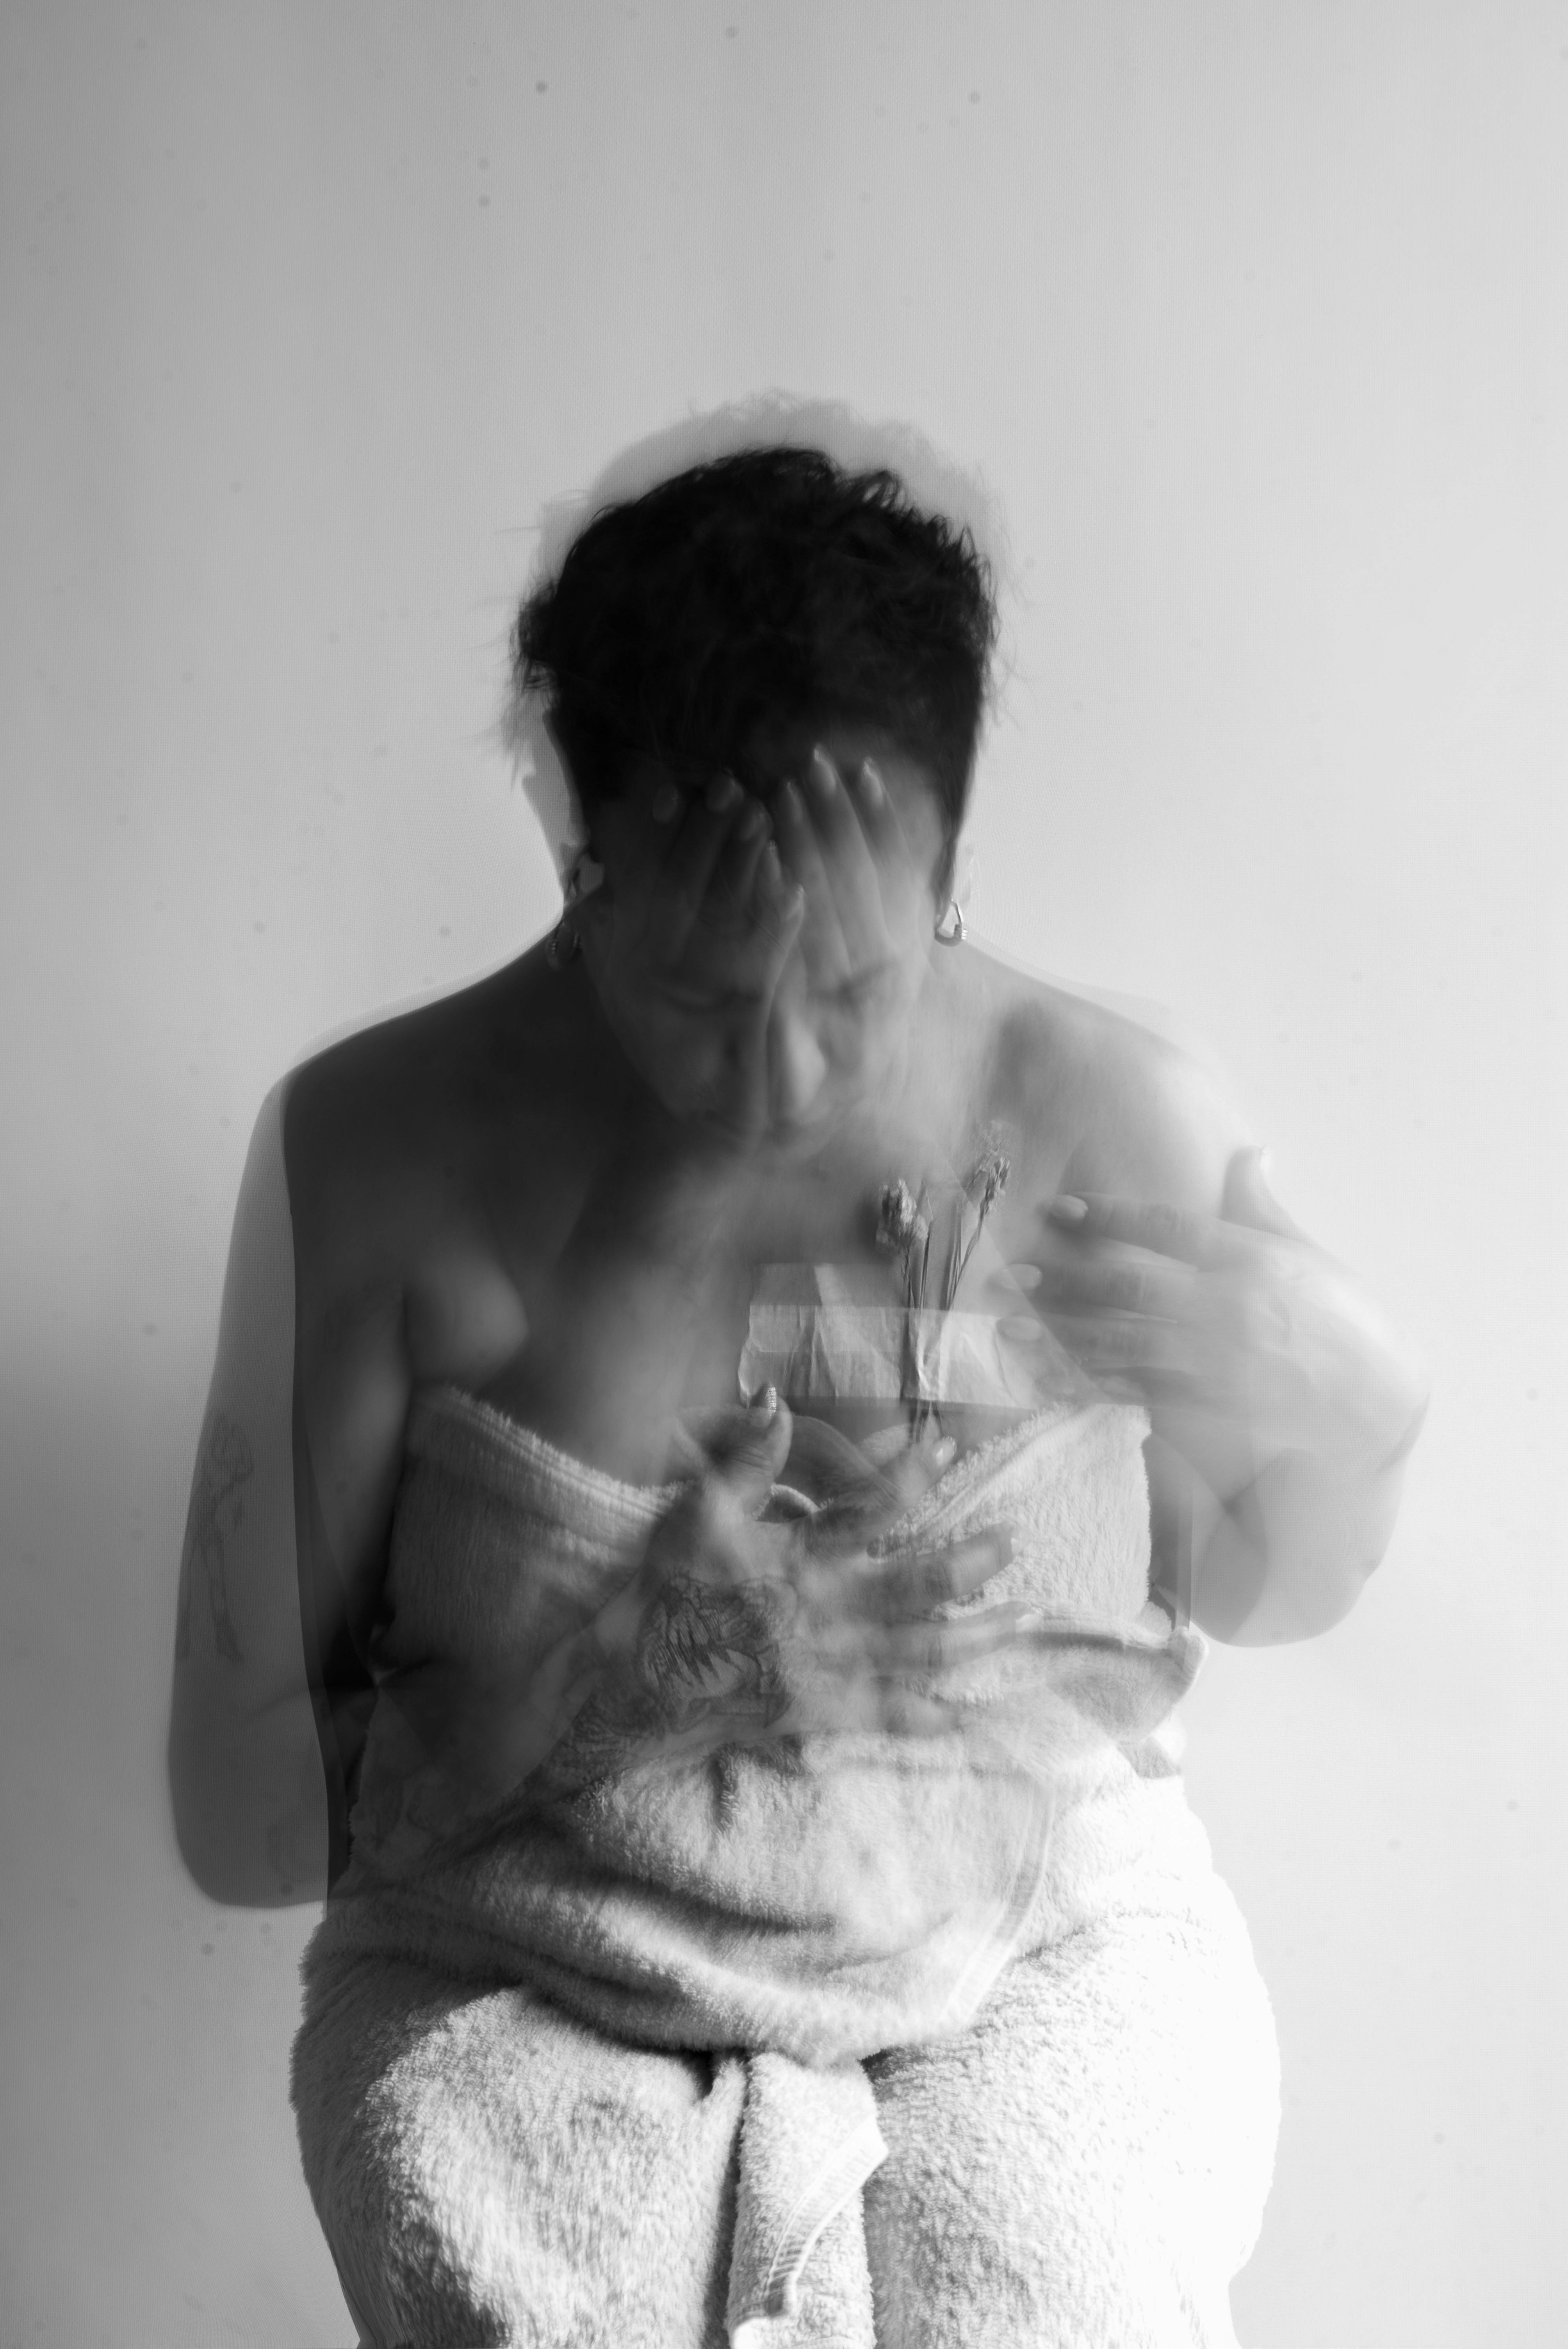 blurred picture of woman in towel